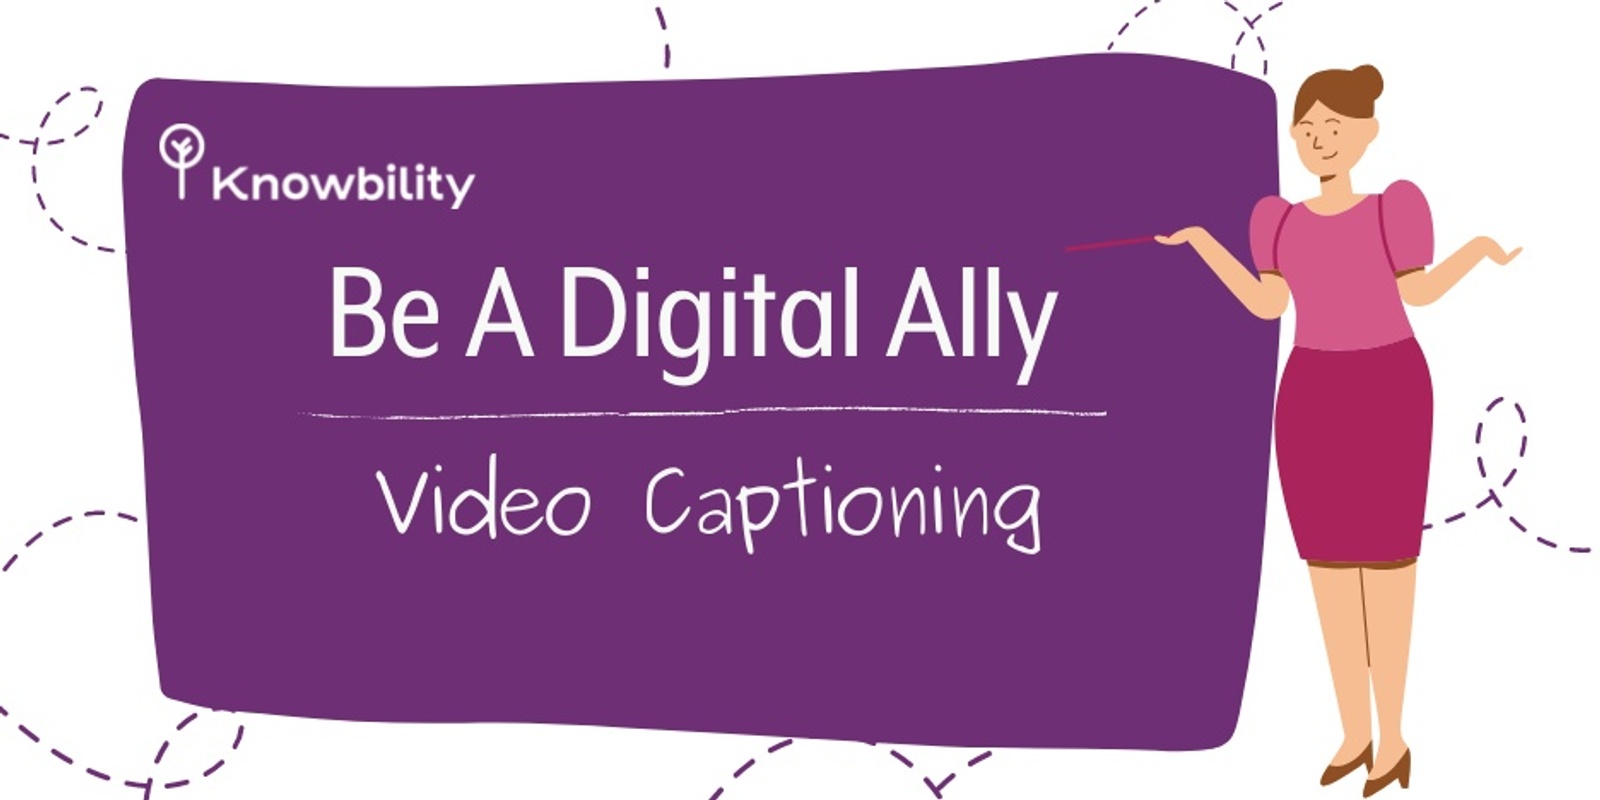 Be A Digital Ally: Video Captioning